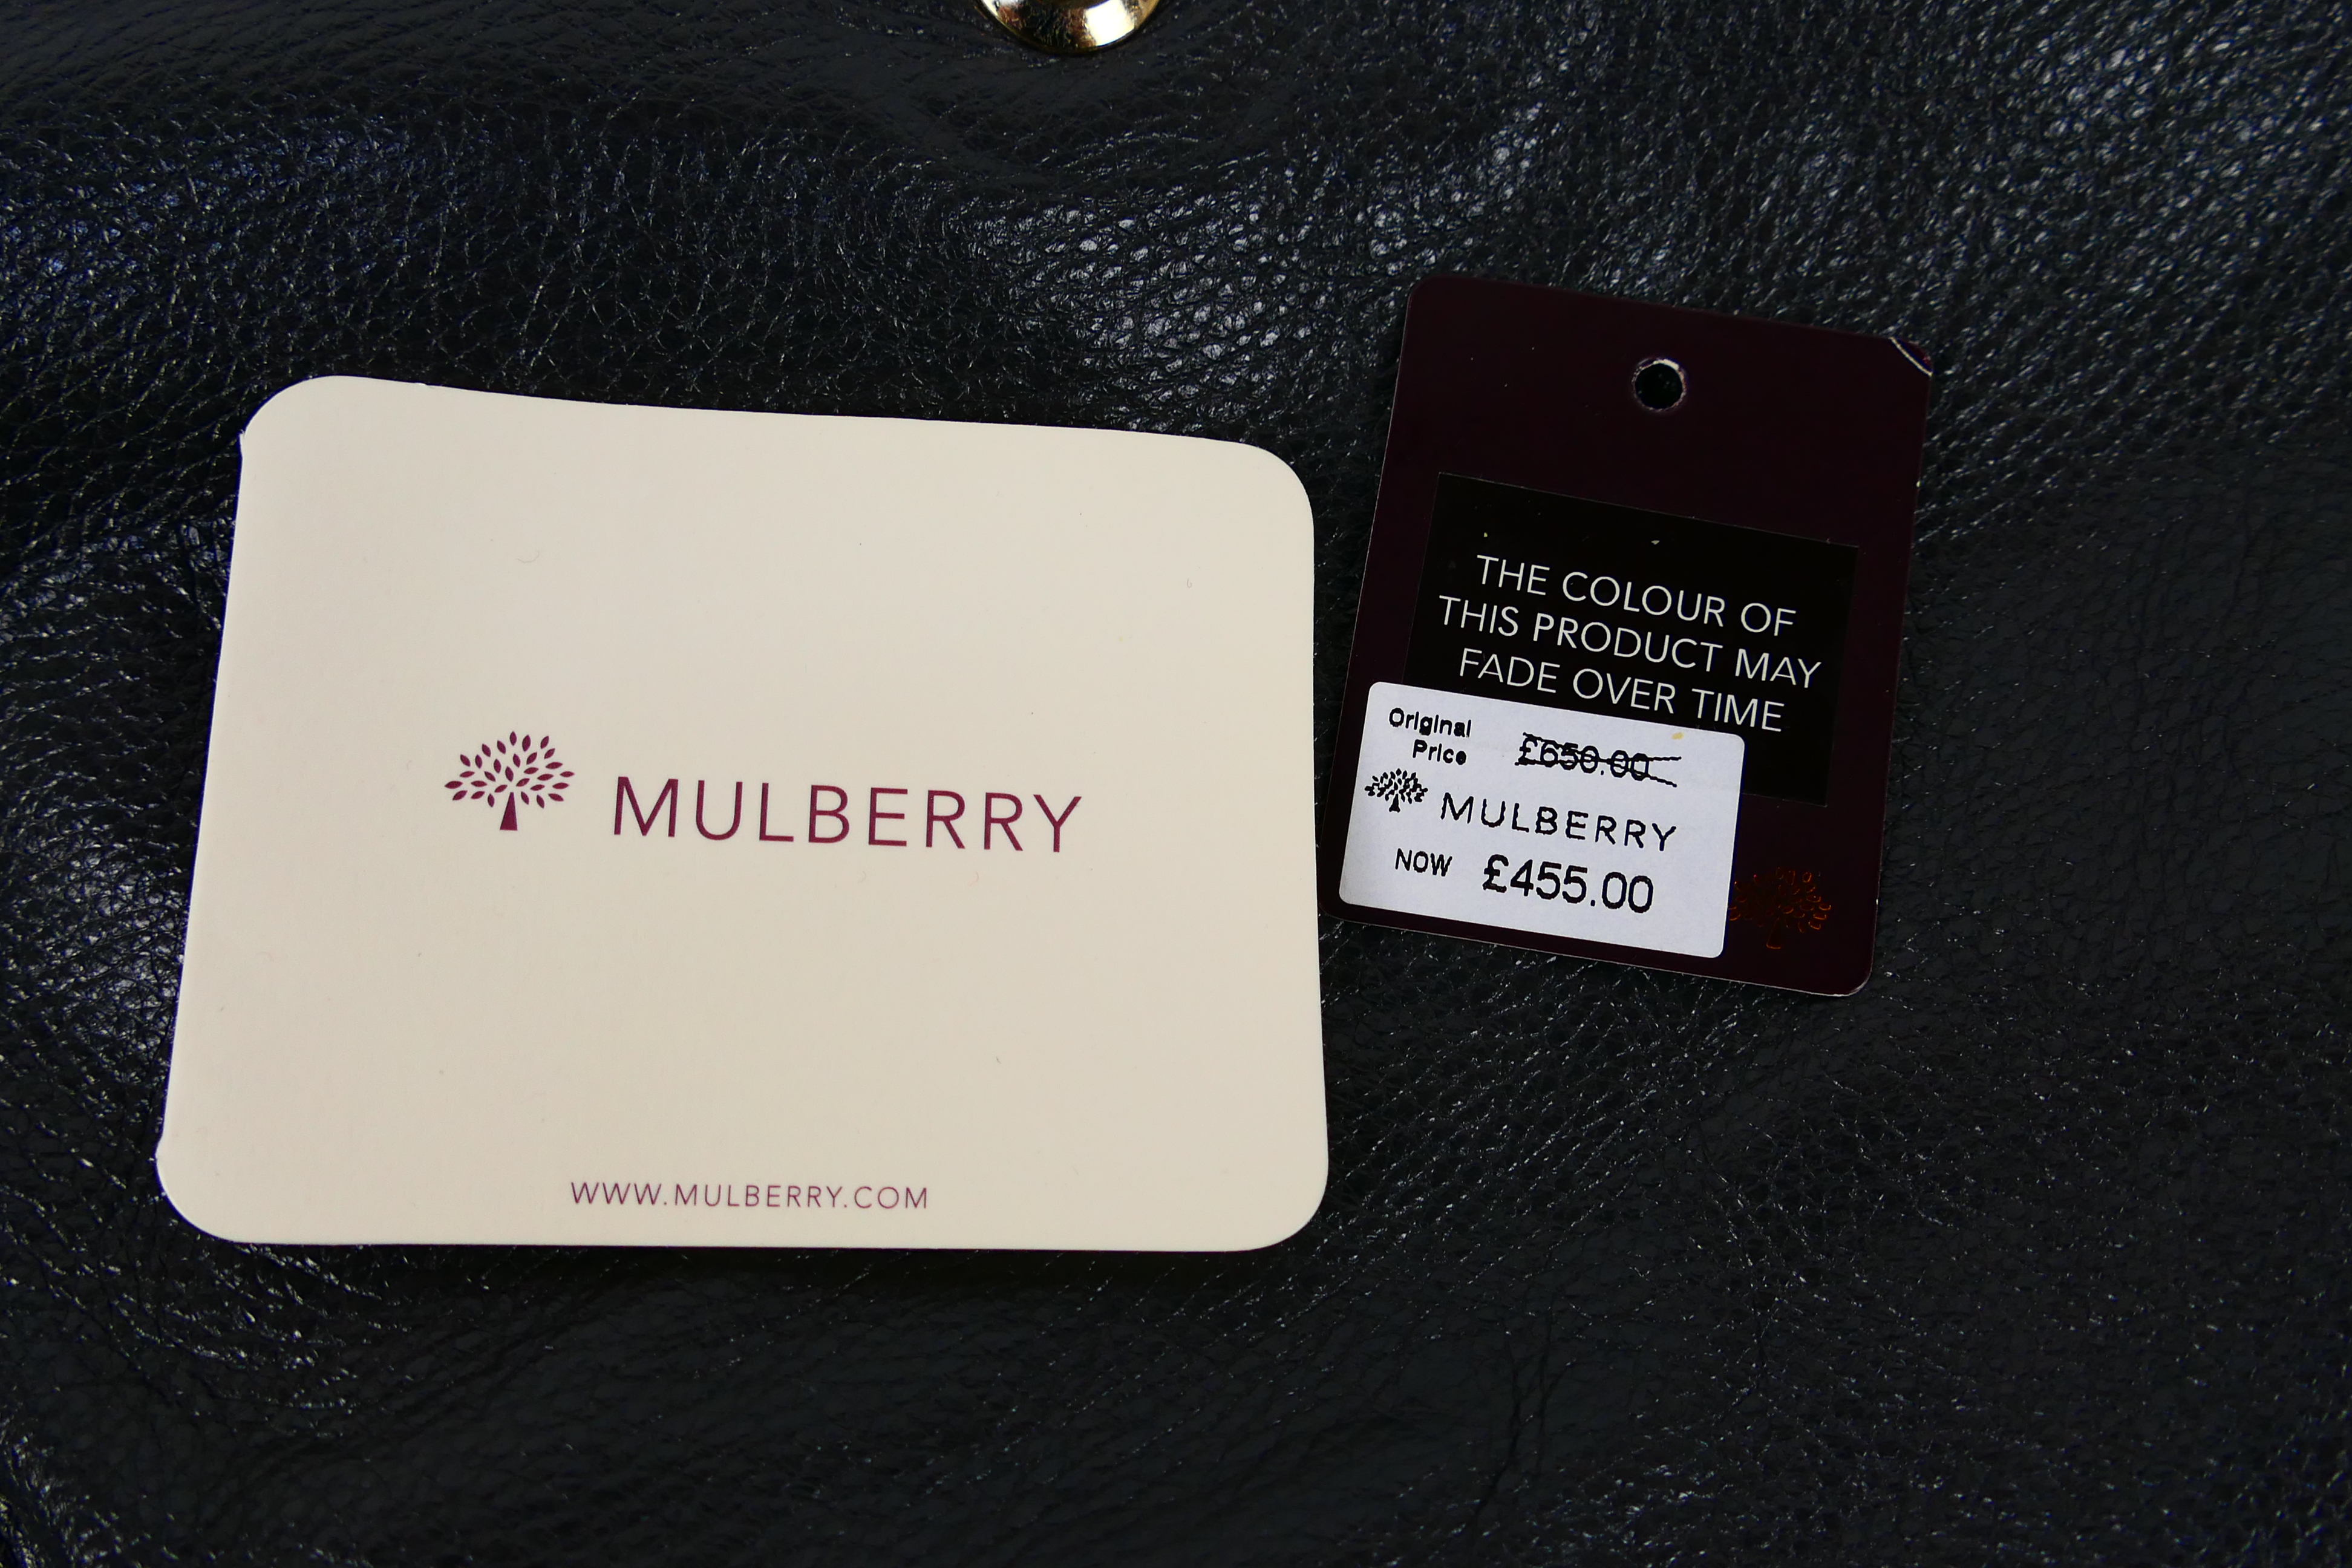 Mulberry - A mouse grey Mulberry leather handbag - Handbag has one interior zip pocket and one - Image 9 of 9